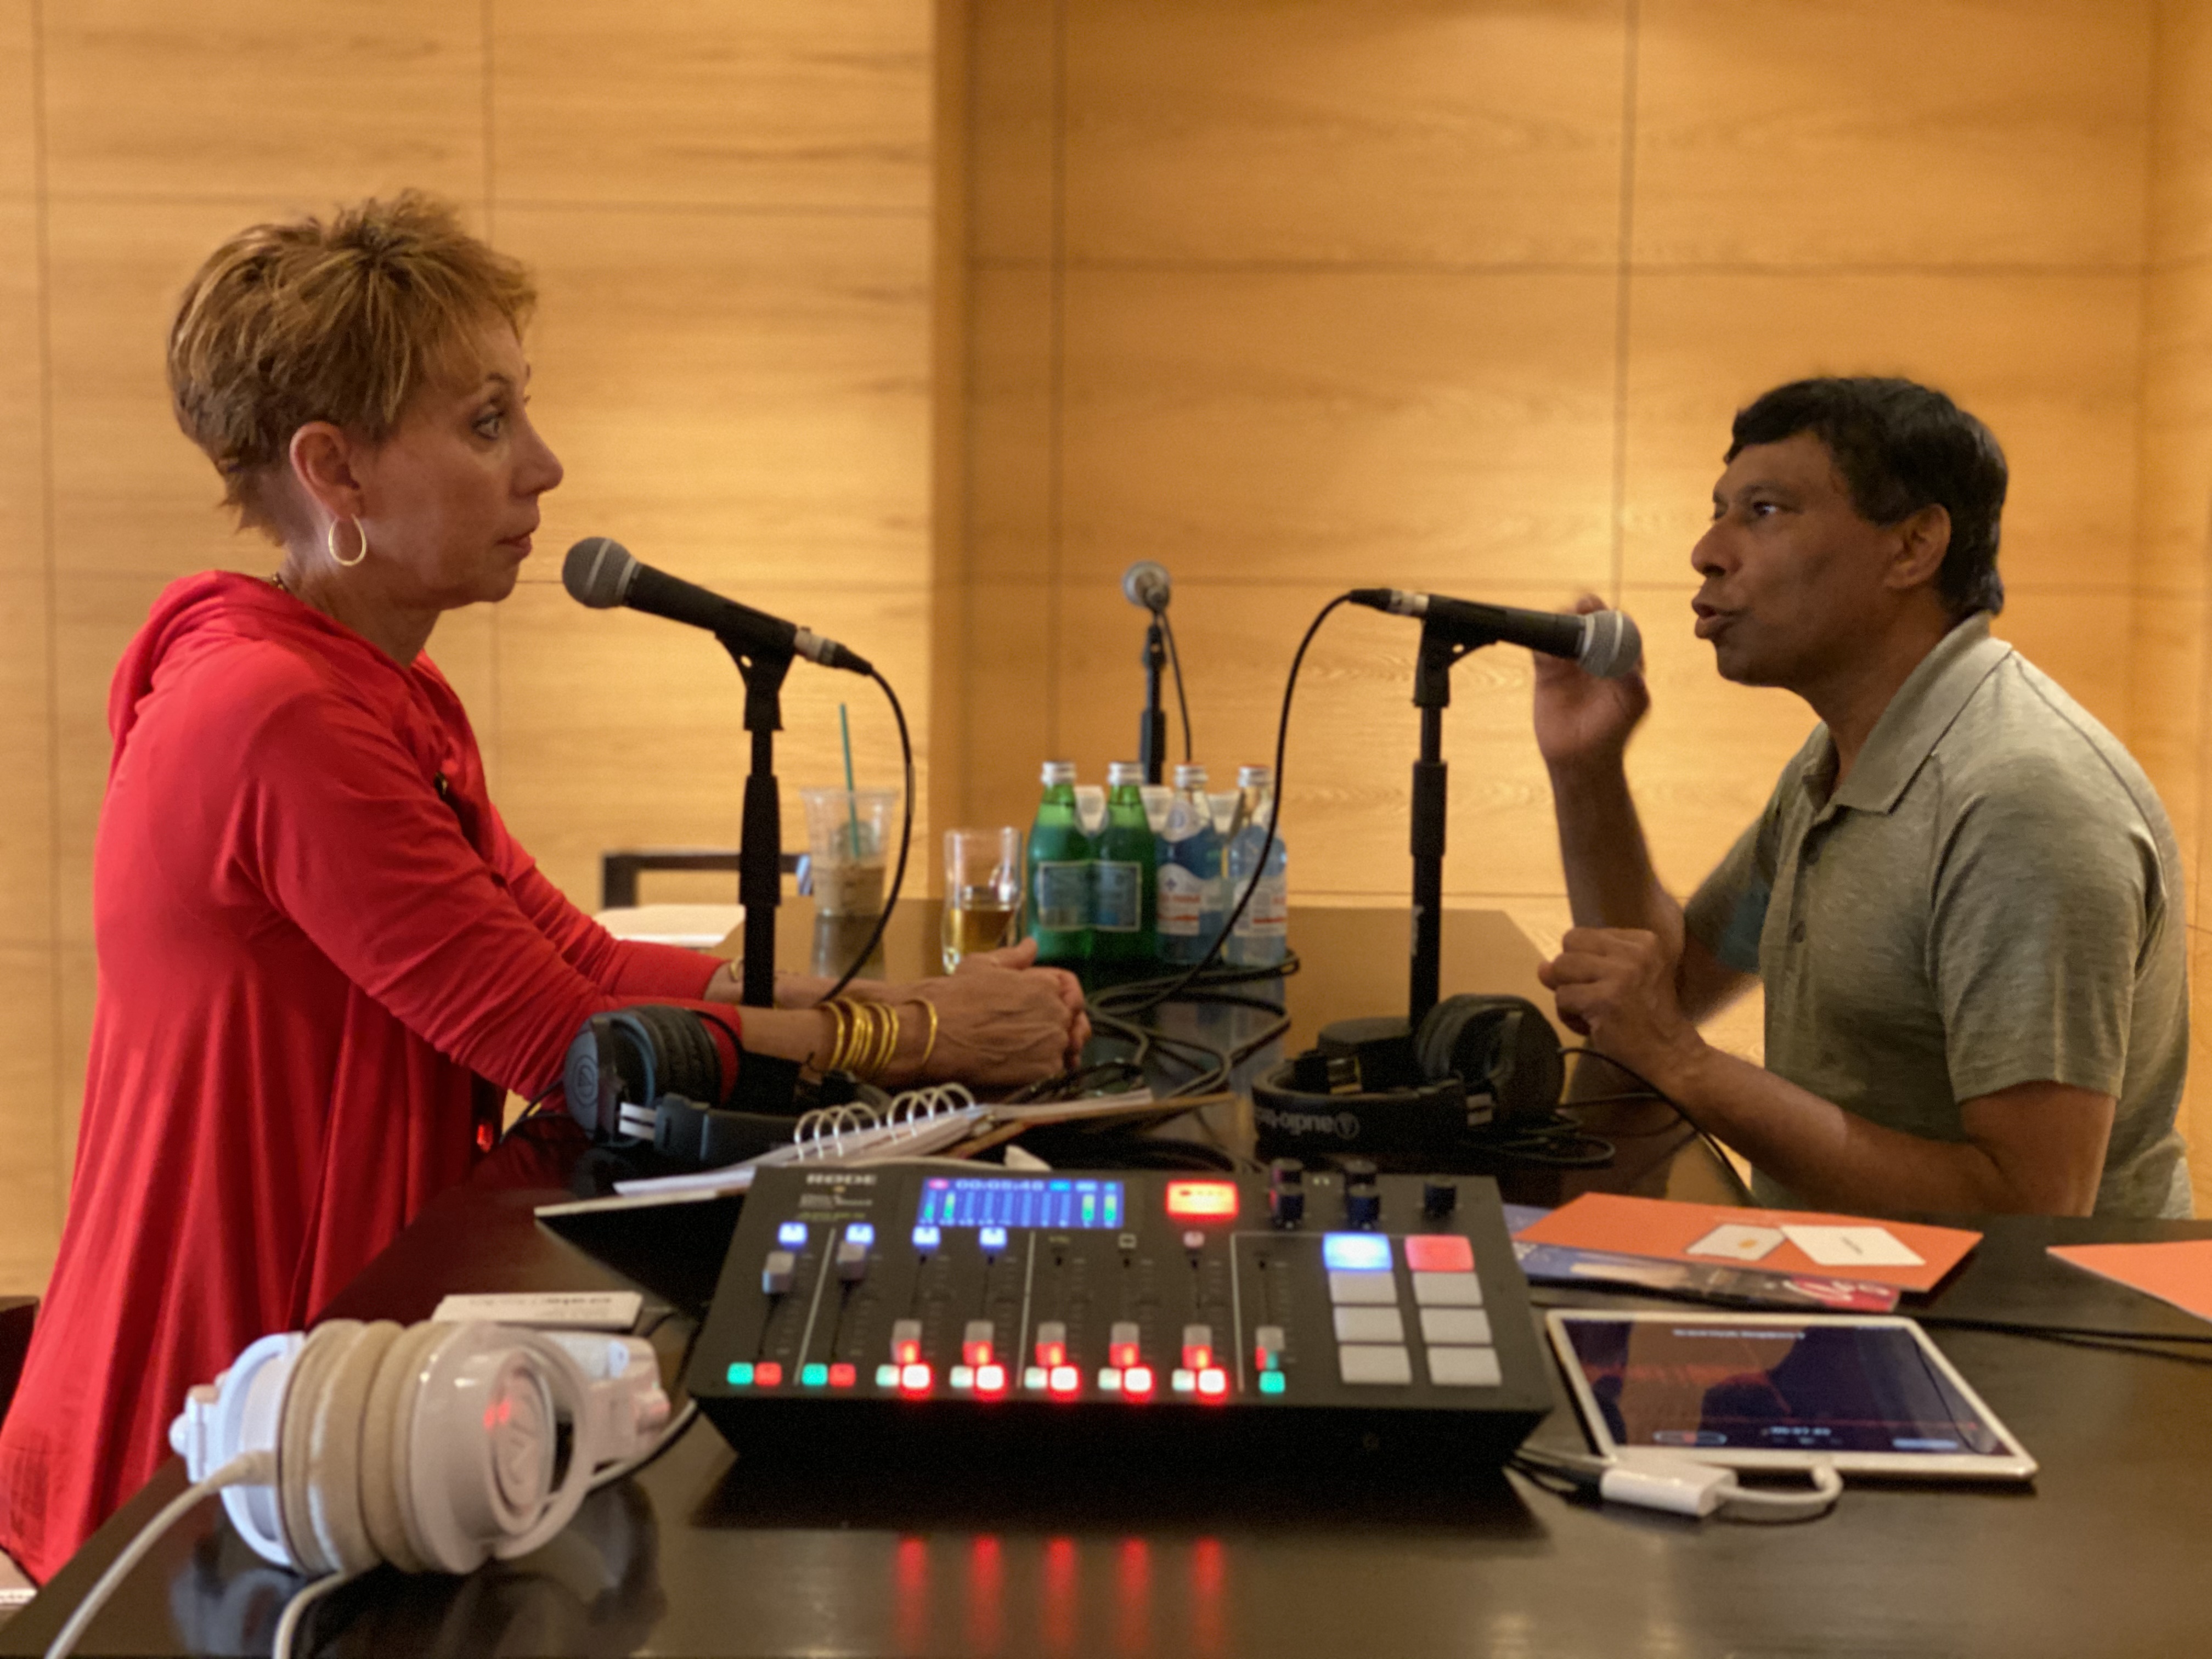 The podcast features interviews of wellness disrupters and pioneers, including Viome CEO Naveen Jain, who has made personalized nutrition his clarion call.